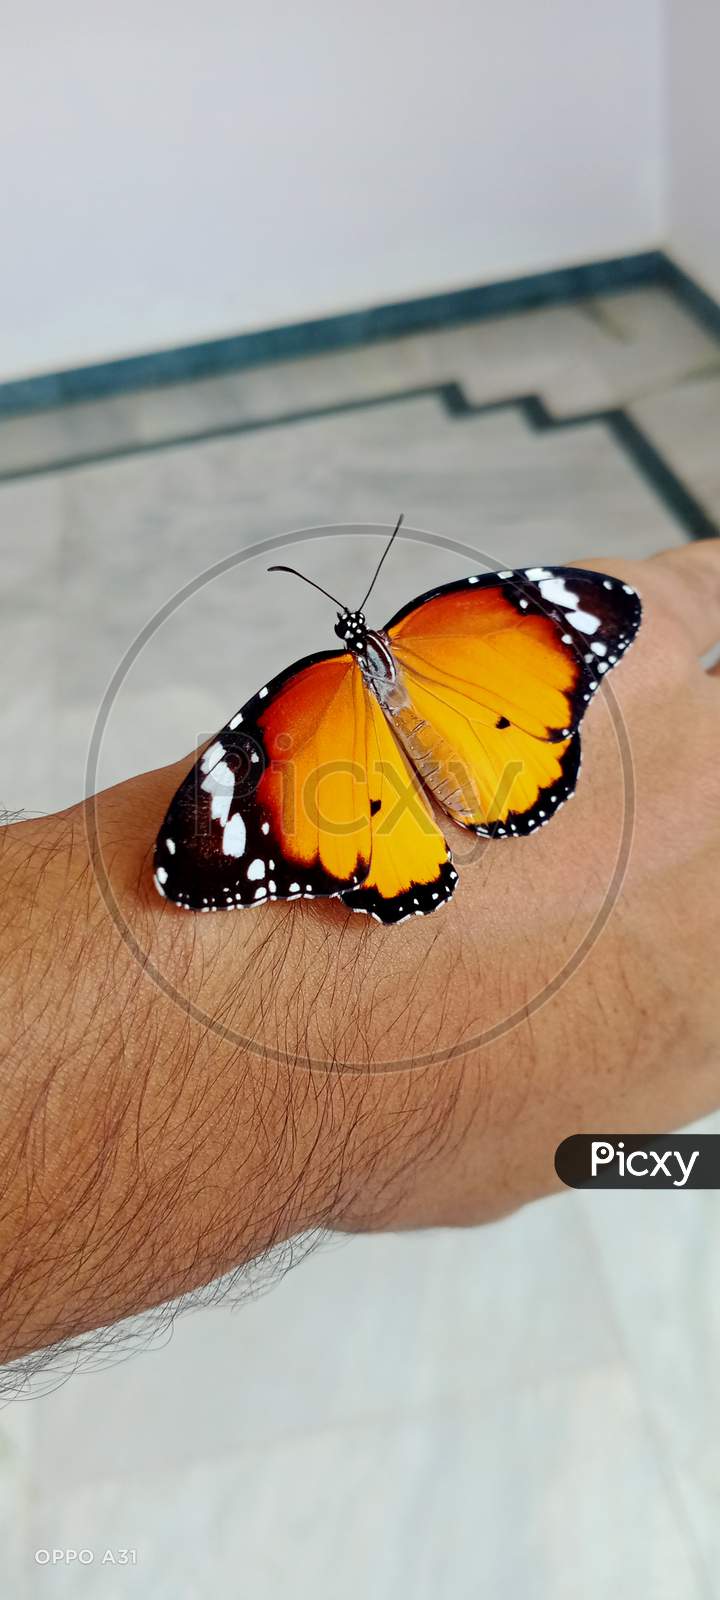 Tiger butterfly 🦋